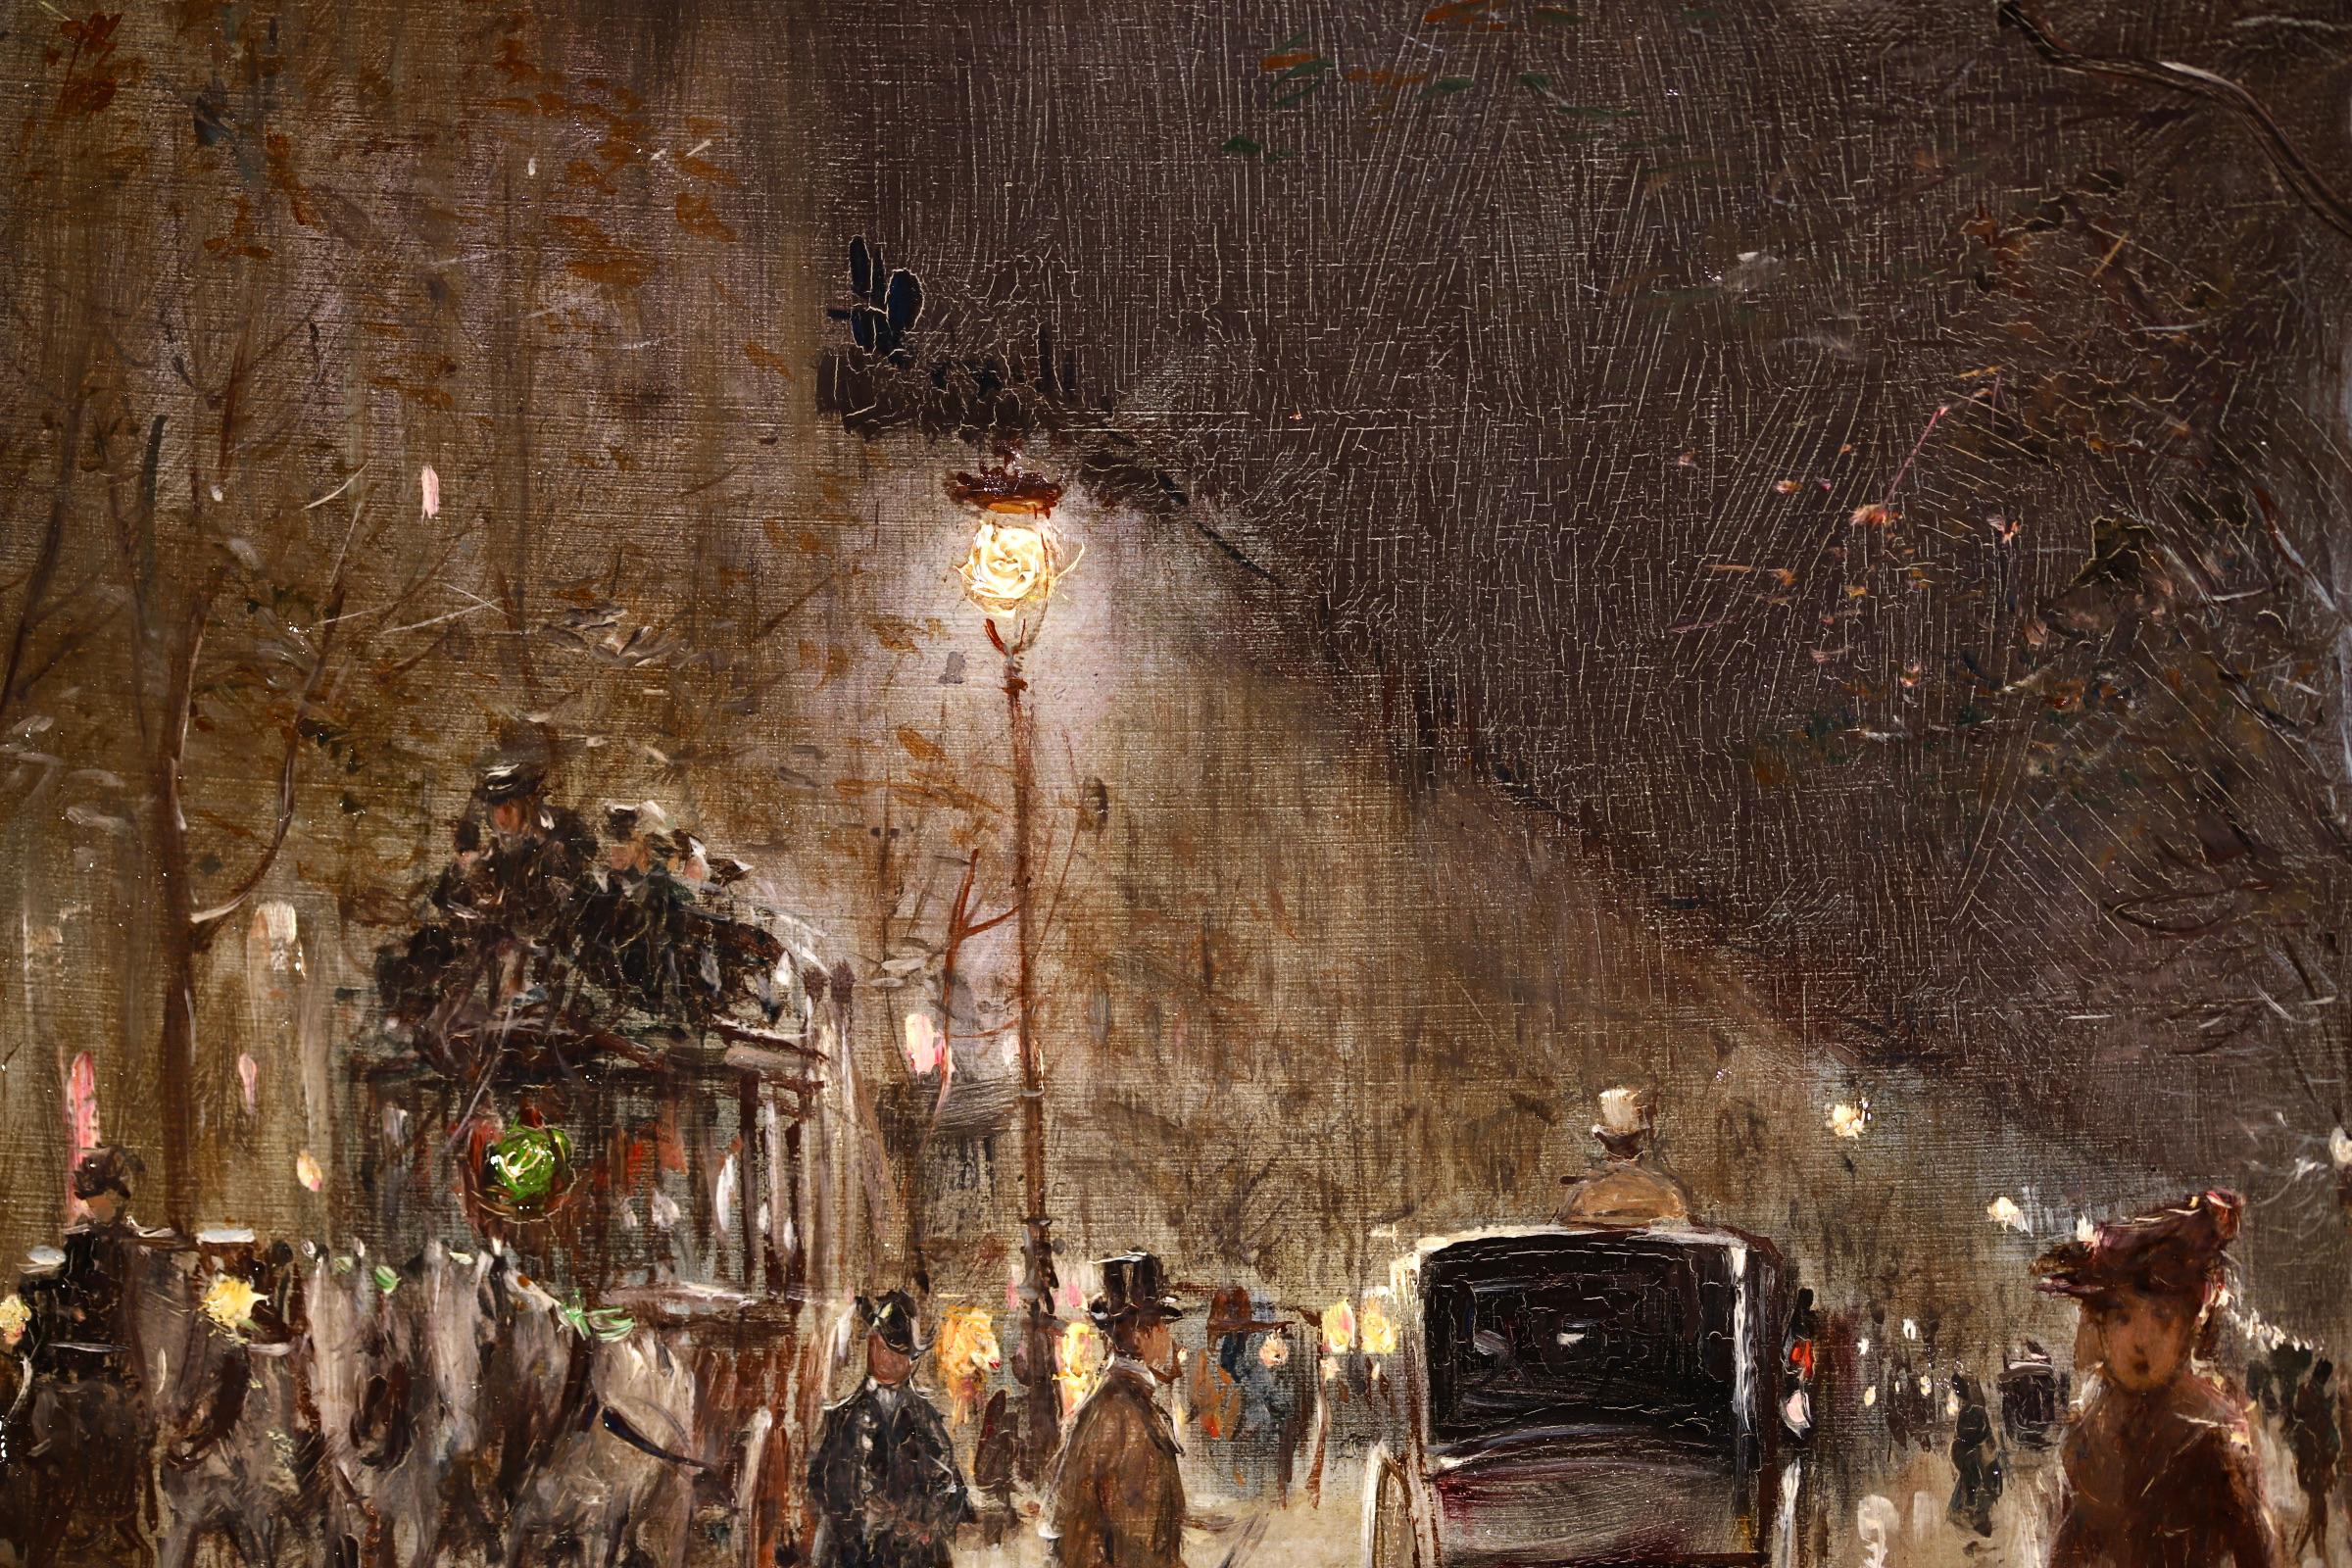 Paris-Grands Boulevards-Moonlight - 19th Century Figures in Cityscape by G Stein 2